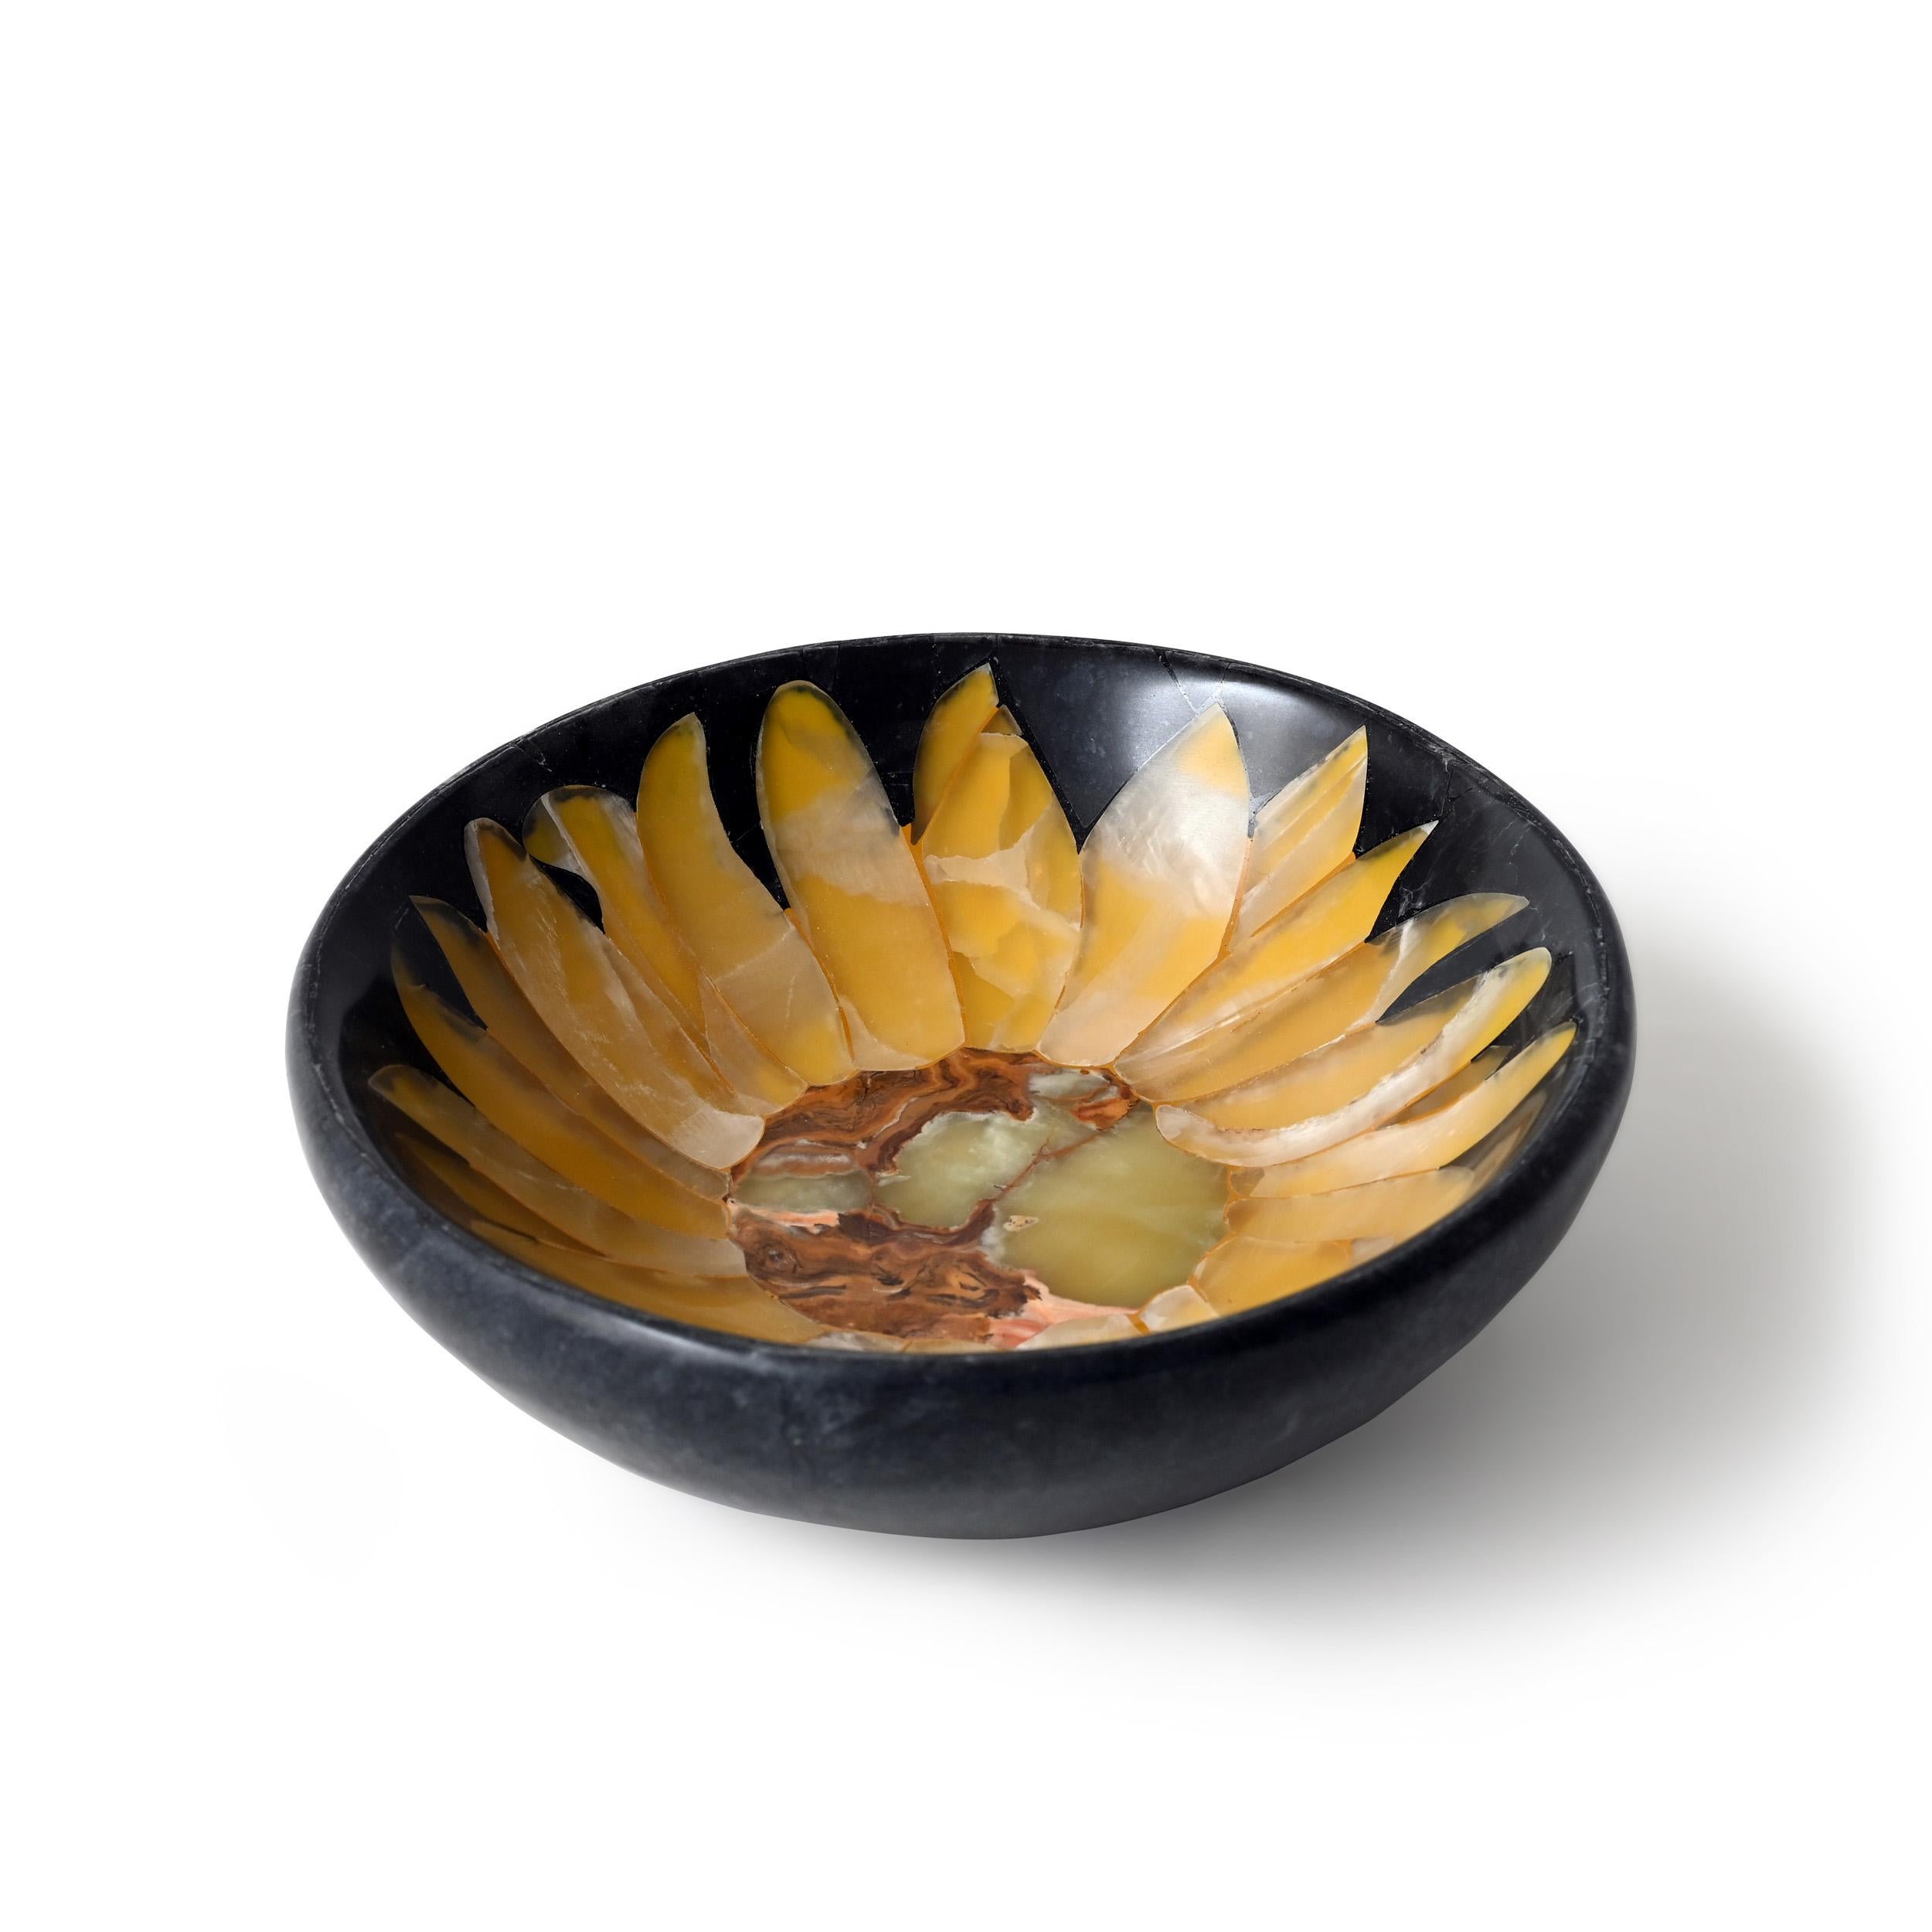 Arles bowl I by Studio Lel
Dimensions: D30.5 x H7.6 cm 
Materials: Onyx, Marble.
Also available in different dimension.

These are handmade from semiprecious stone and marble in a small artisanal workshop. Please note that variations and slight